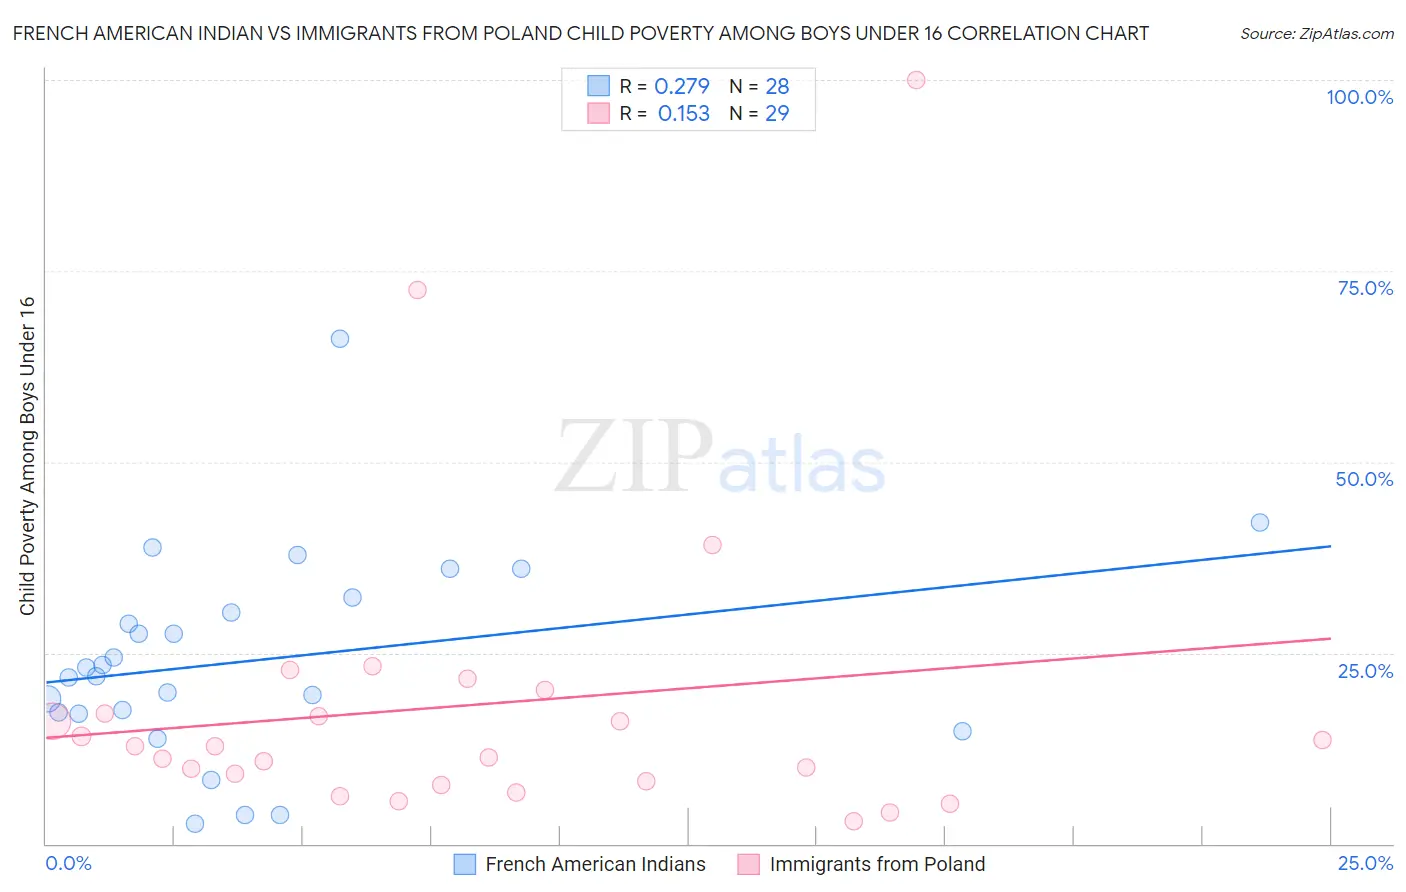 French American Indian vs Immigrants from Poland Child Poverty Among Boys Under 16